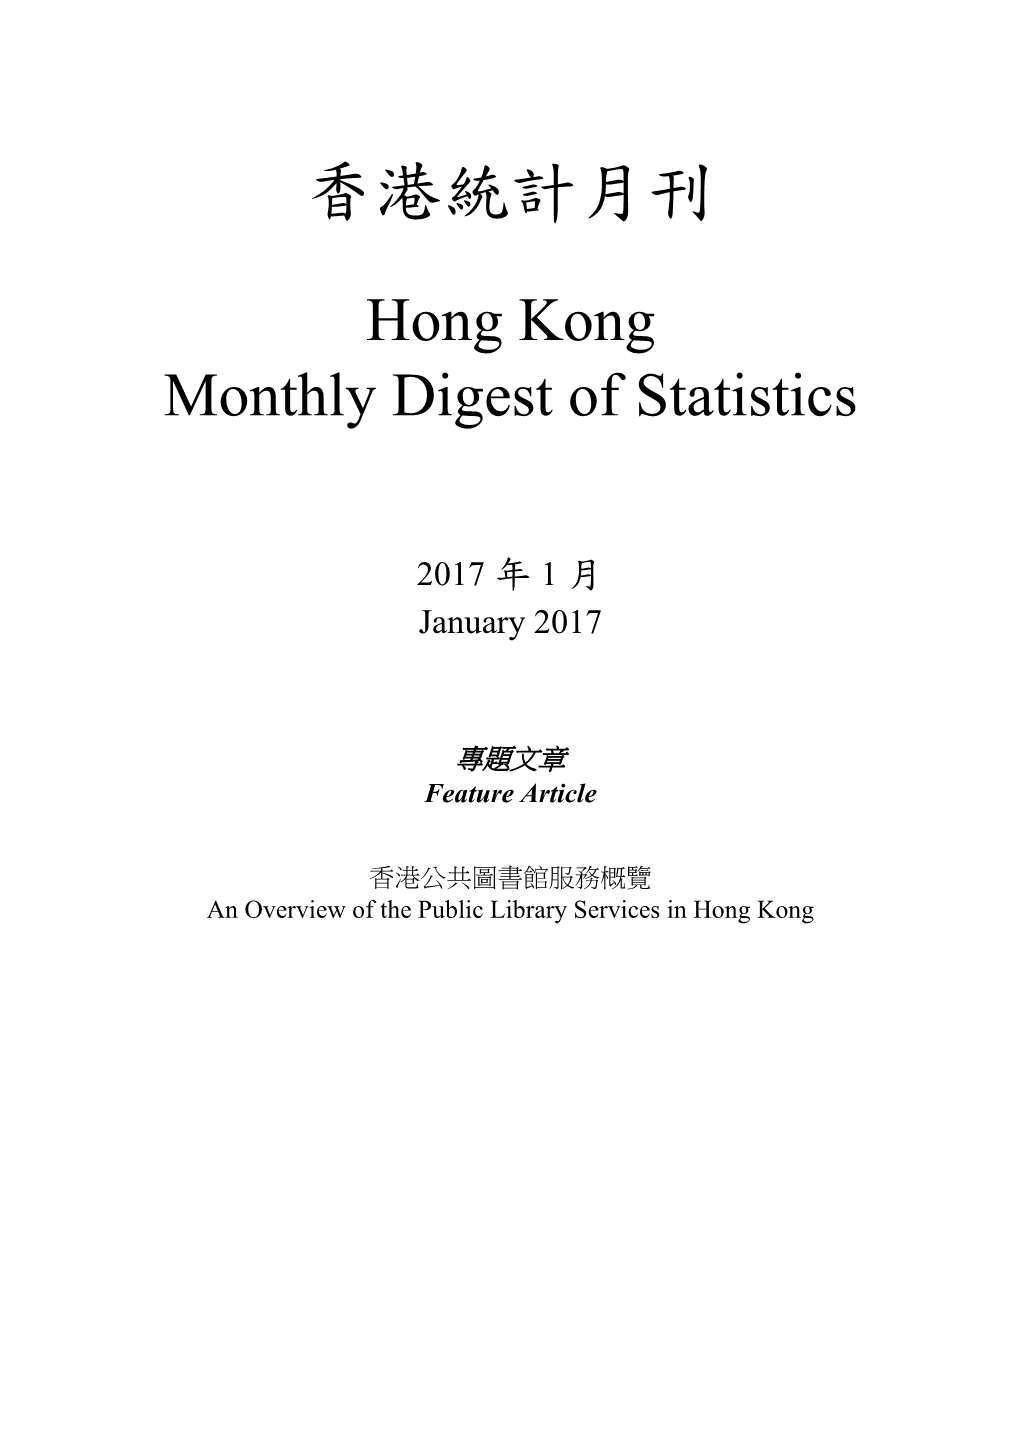 An Overview of the Public Library Services in Hong Kong 香港公共